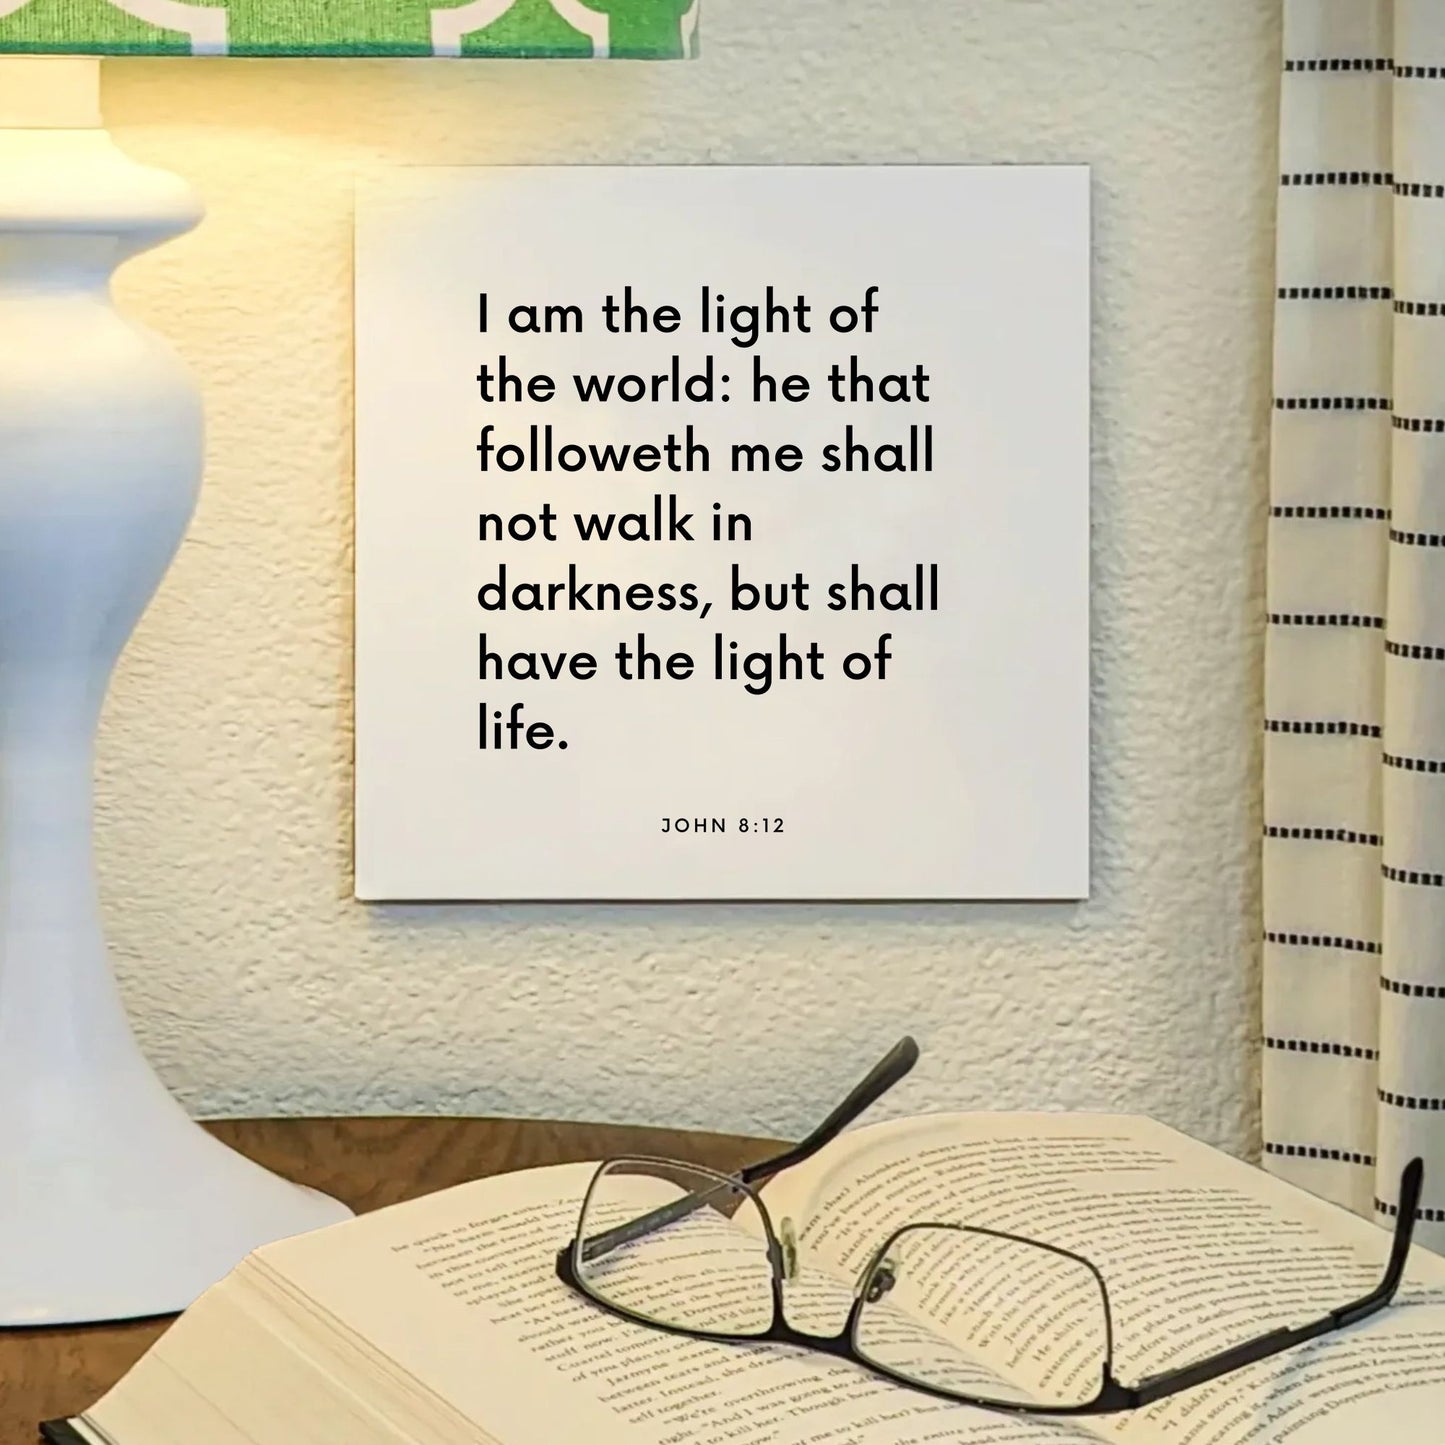 Lamp mouting of the scripture tile for John 8:12 - "I am the light of the world"